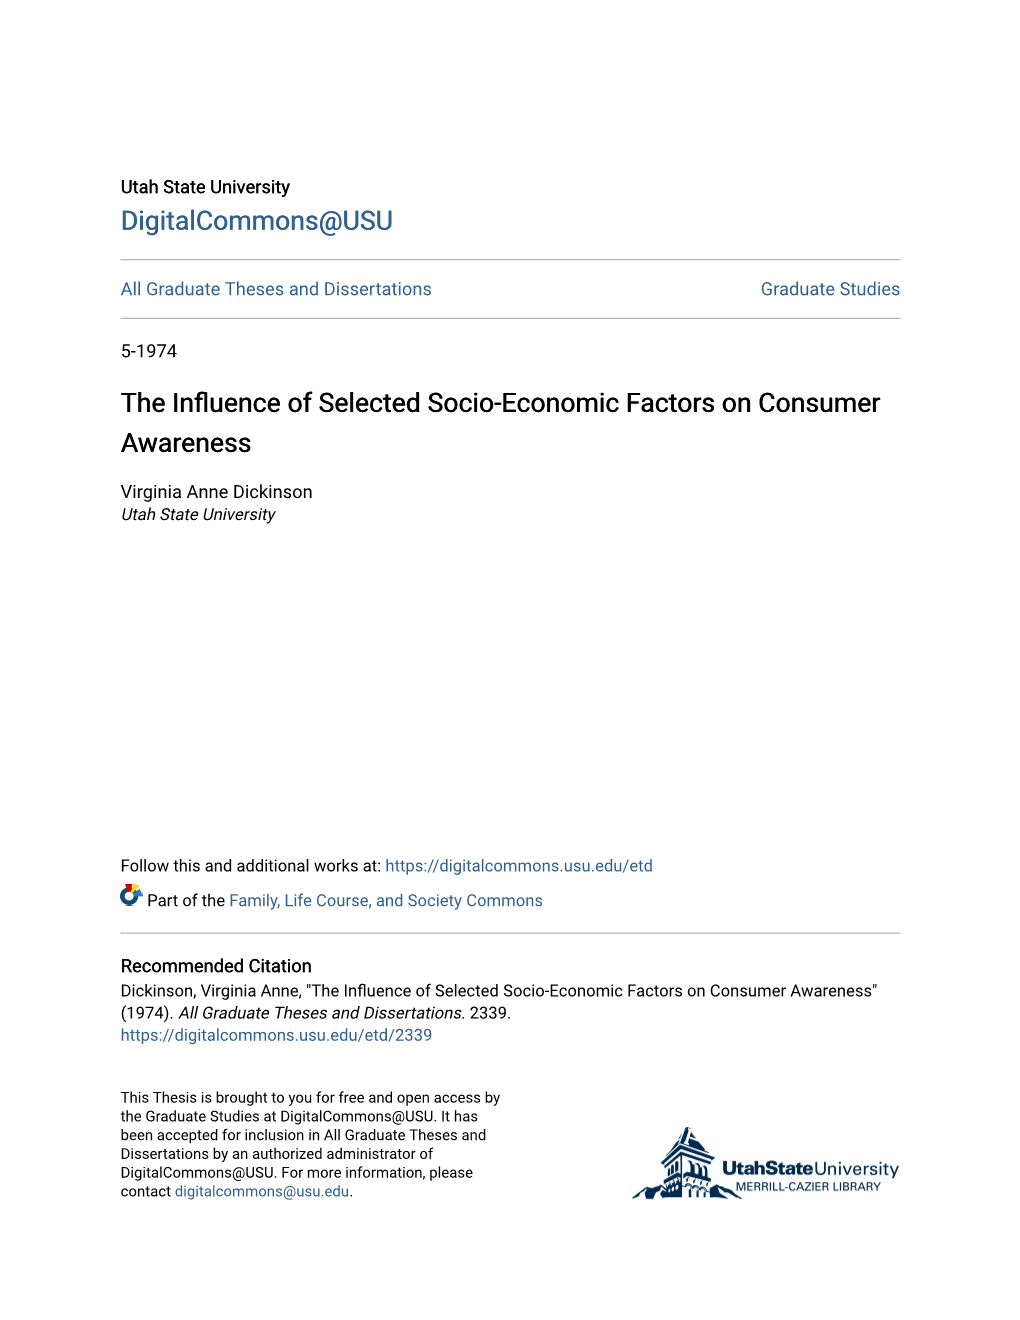 The Influence of Selected Socio-Economic Factors on Consumer Awareness